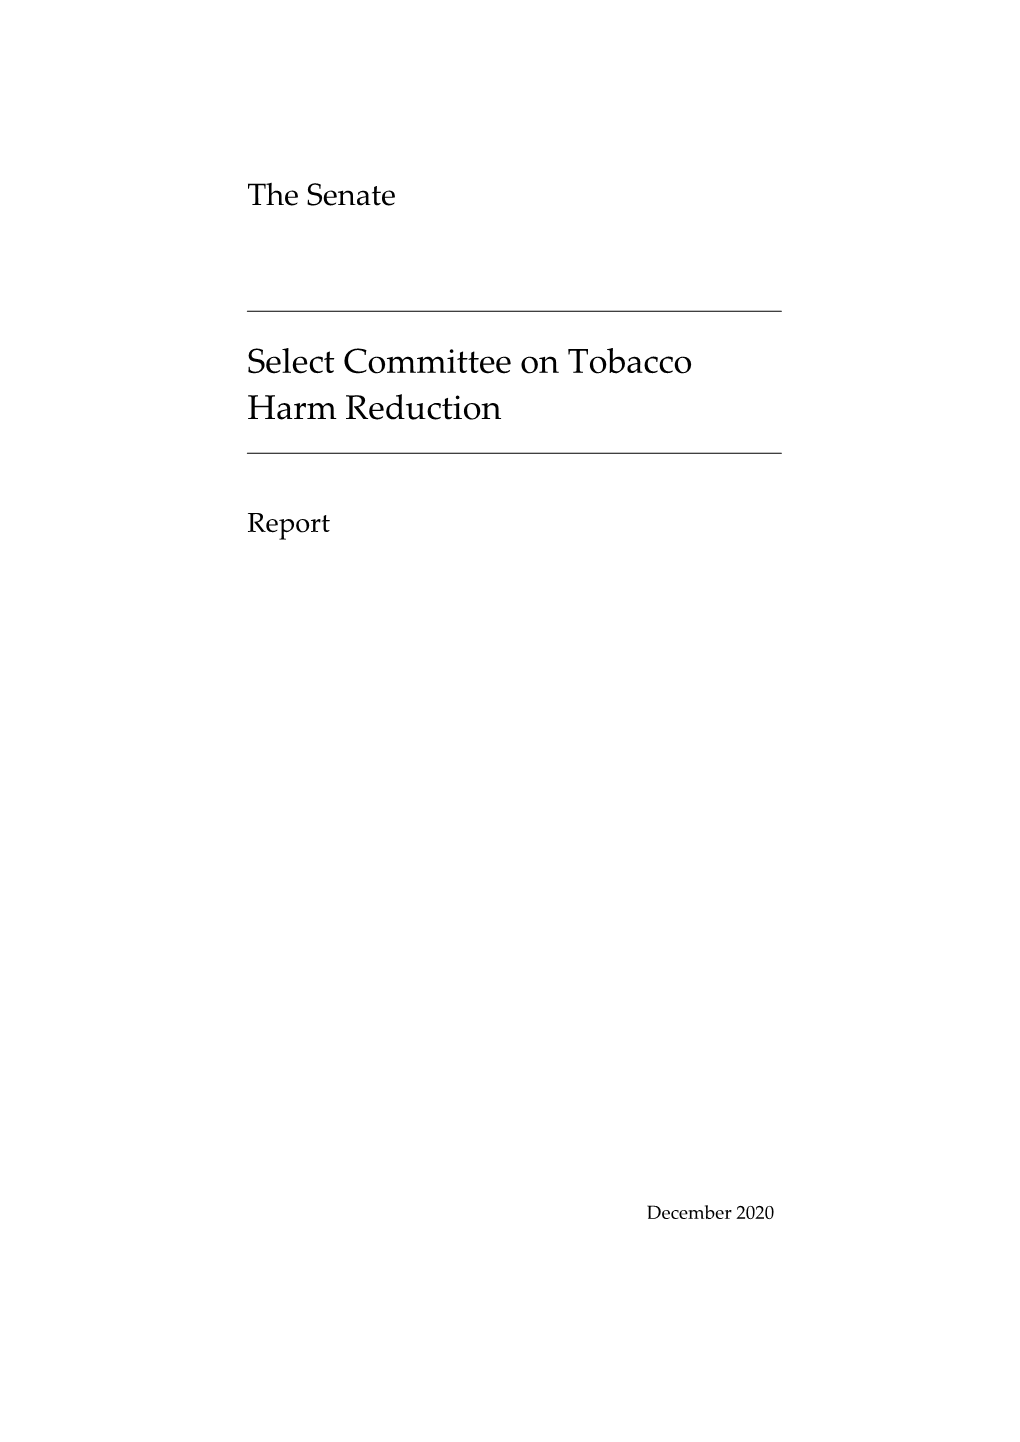 Select Committee on Tobacco Harm Reduction